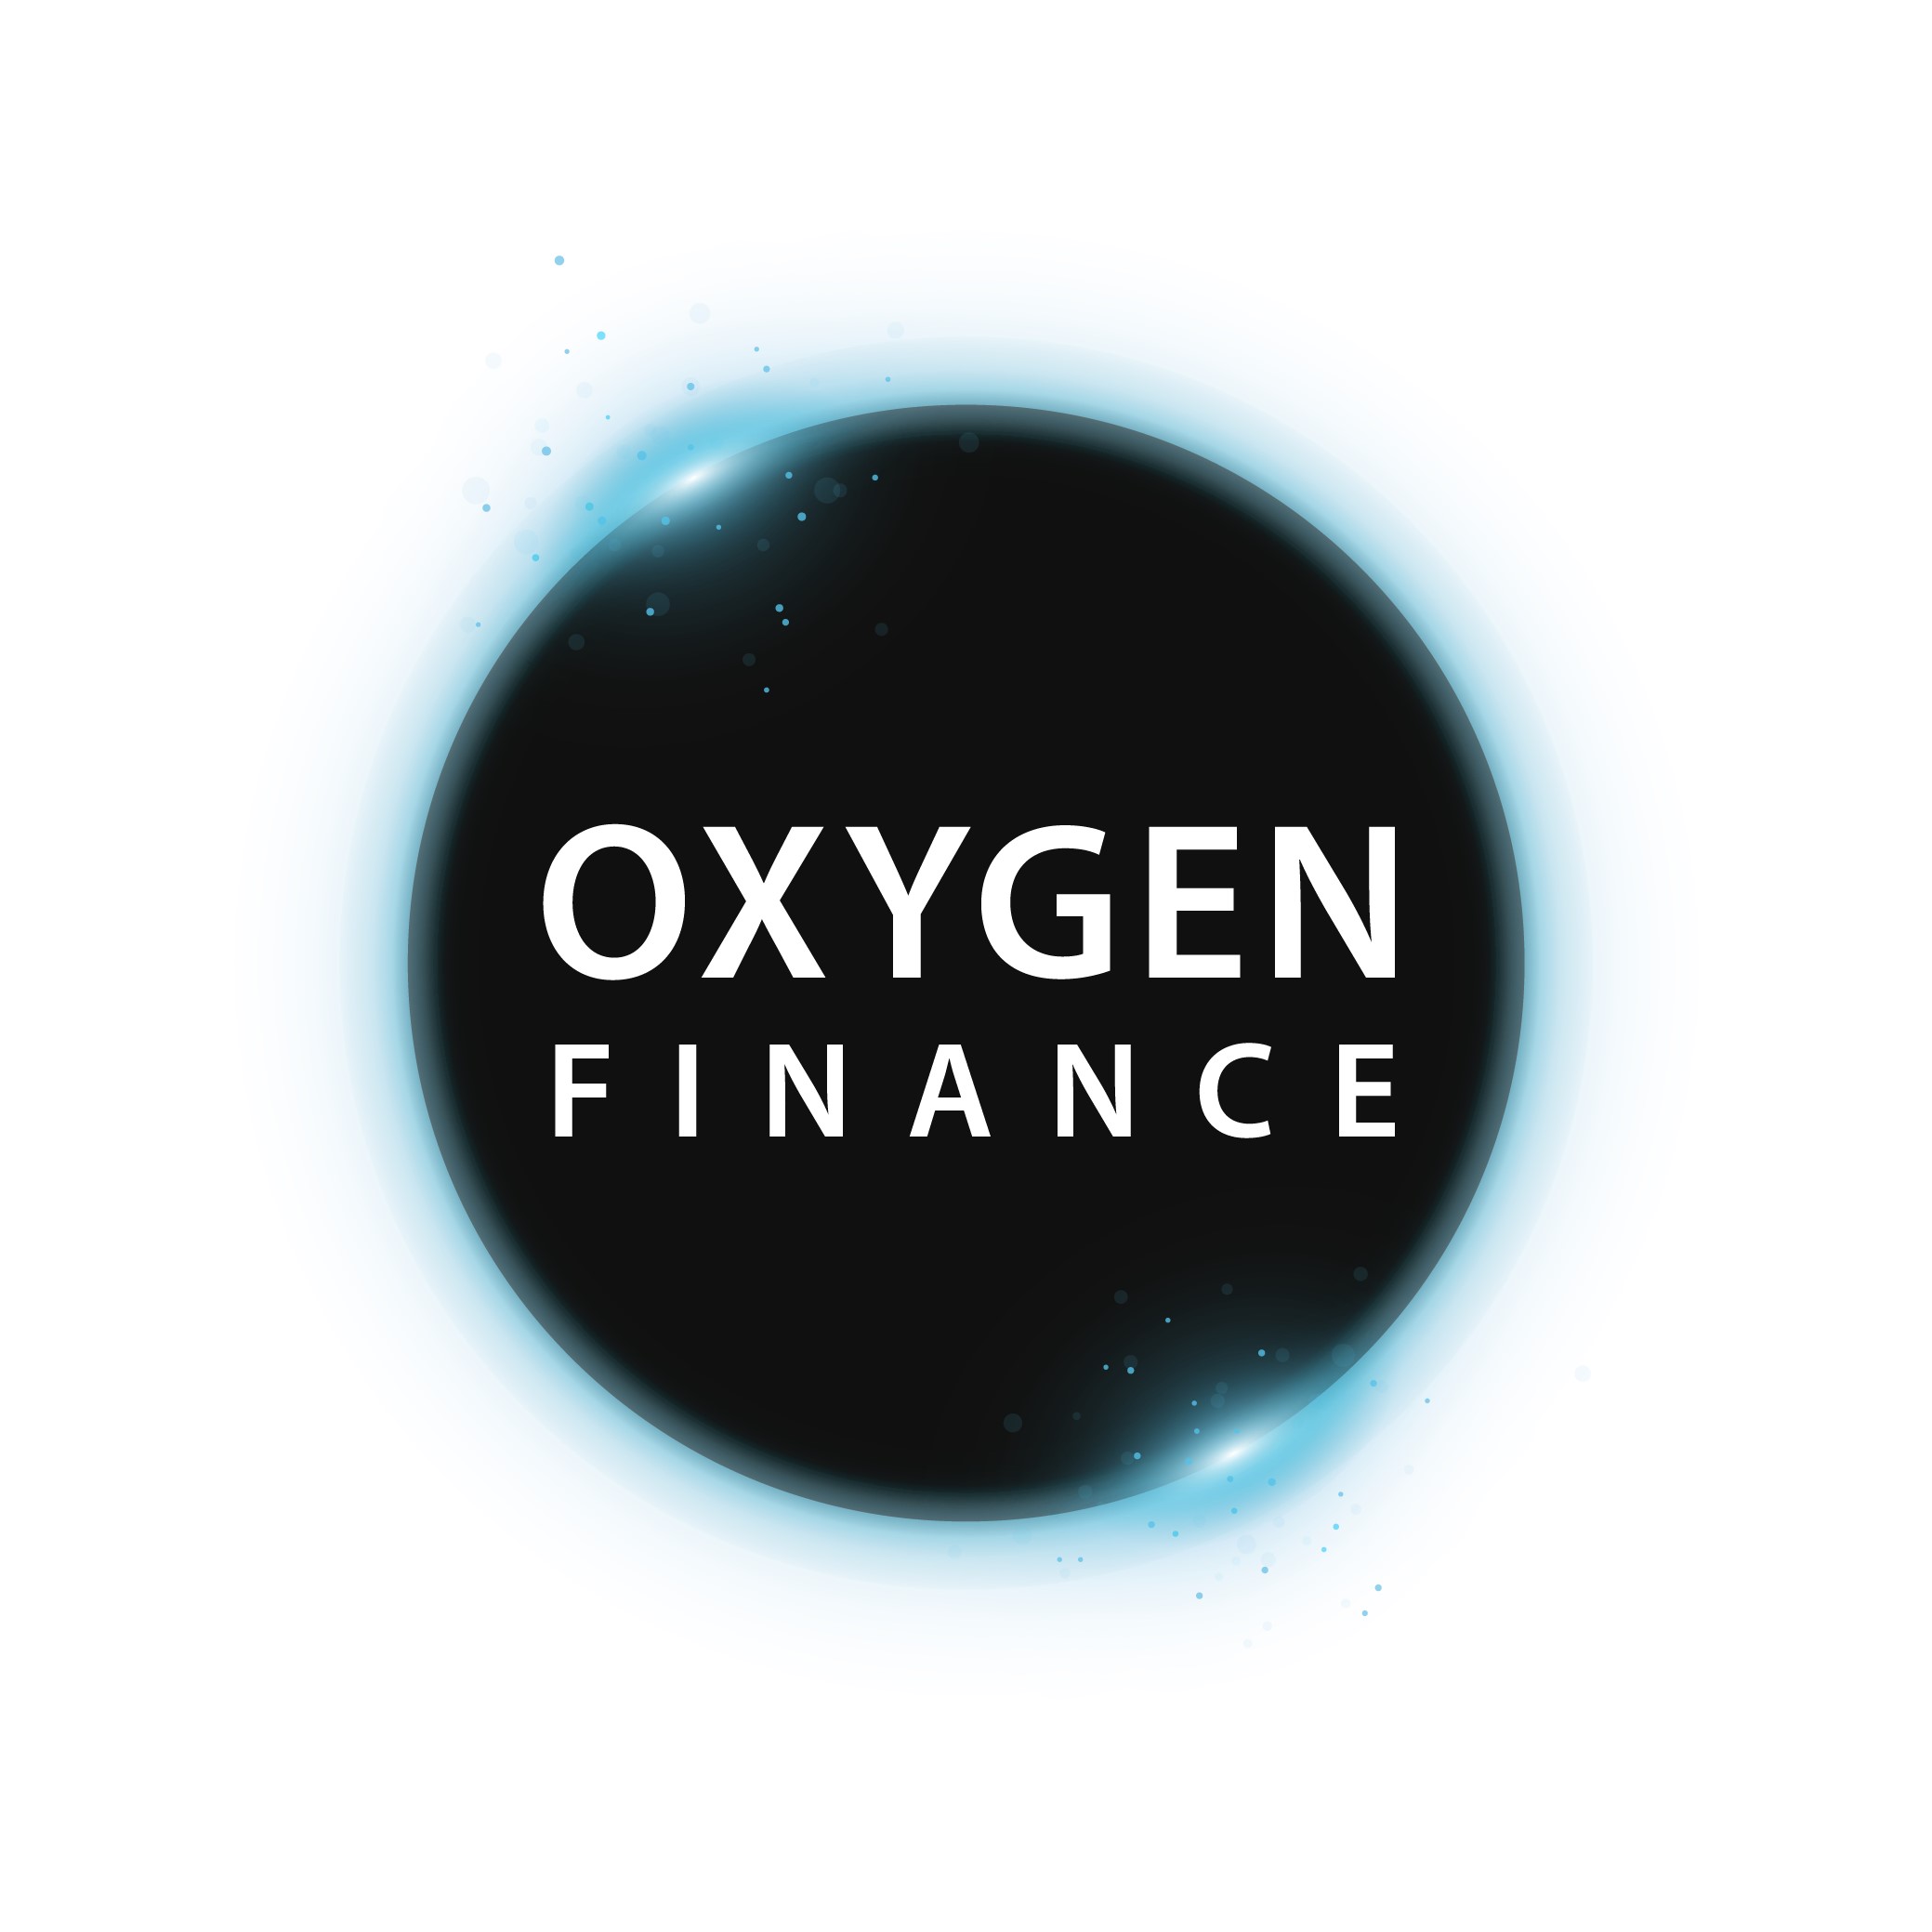 Oxygen Finance rounds off quarter with six Early Payment client wins – adding £2.7bn of Procurement Spend